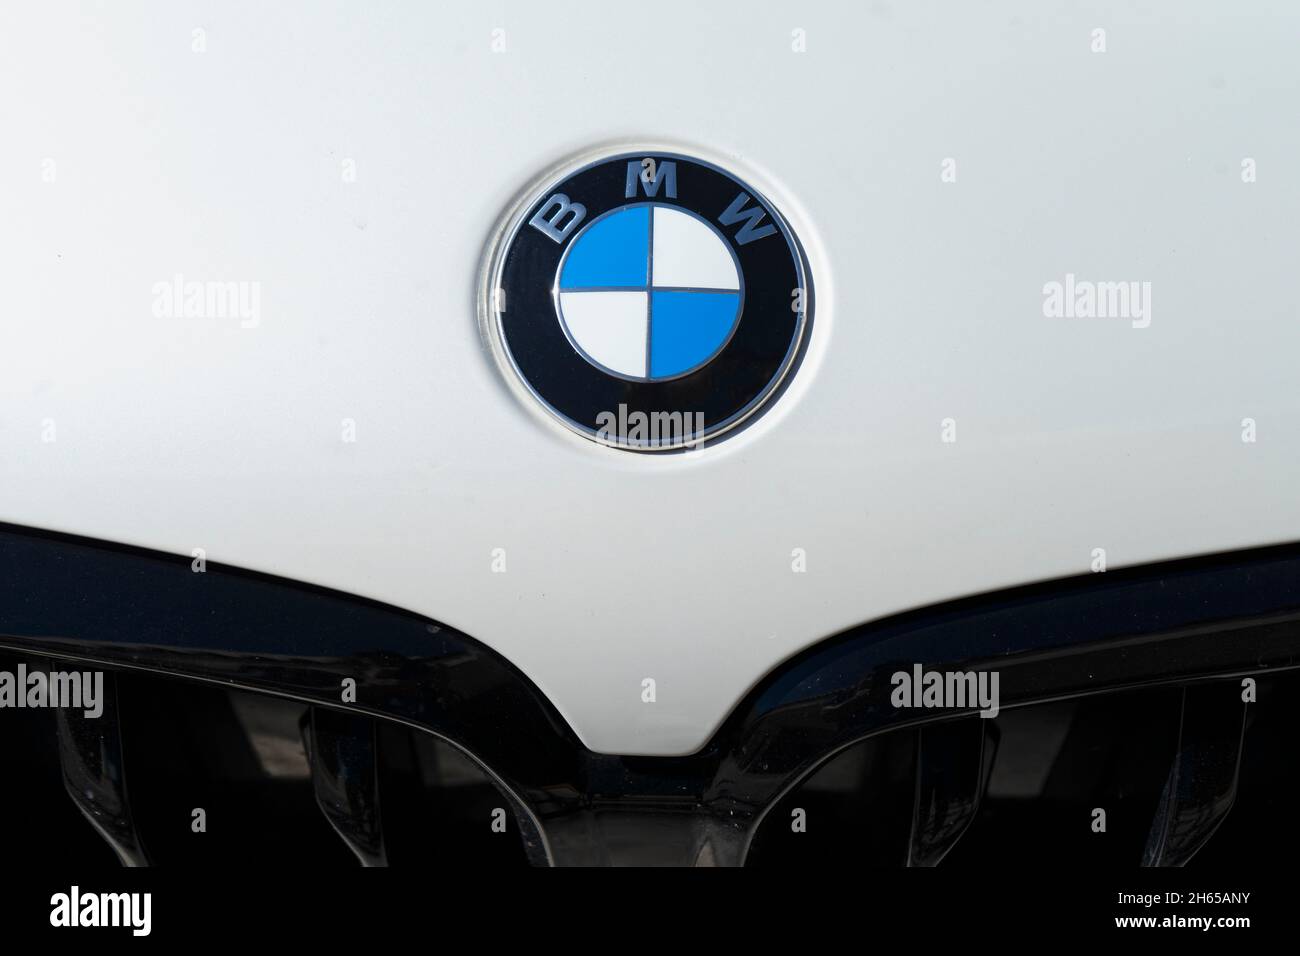 Close-up on the BMW logo on the front of the white car parked on the street. Automotive Industry Stock Photo